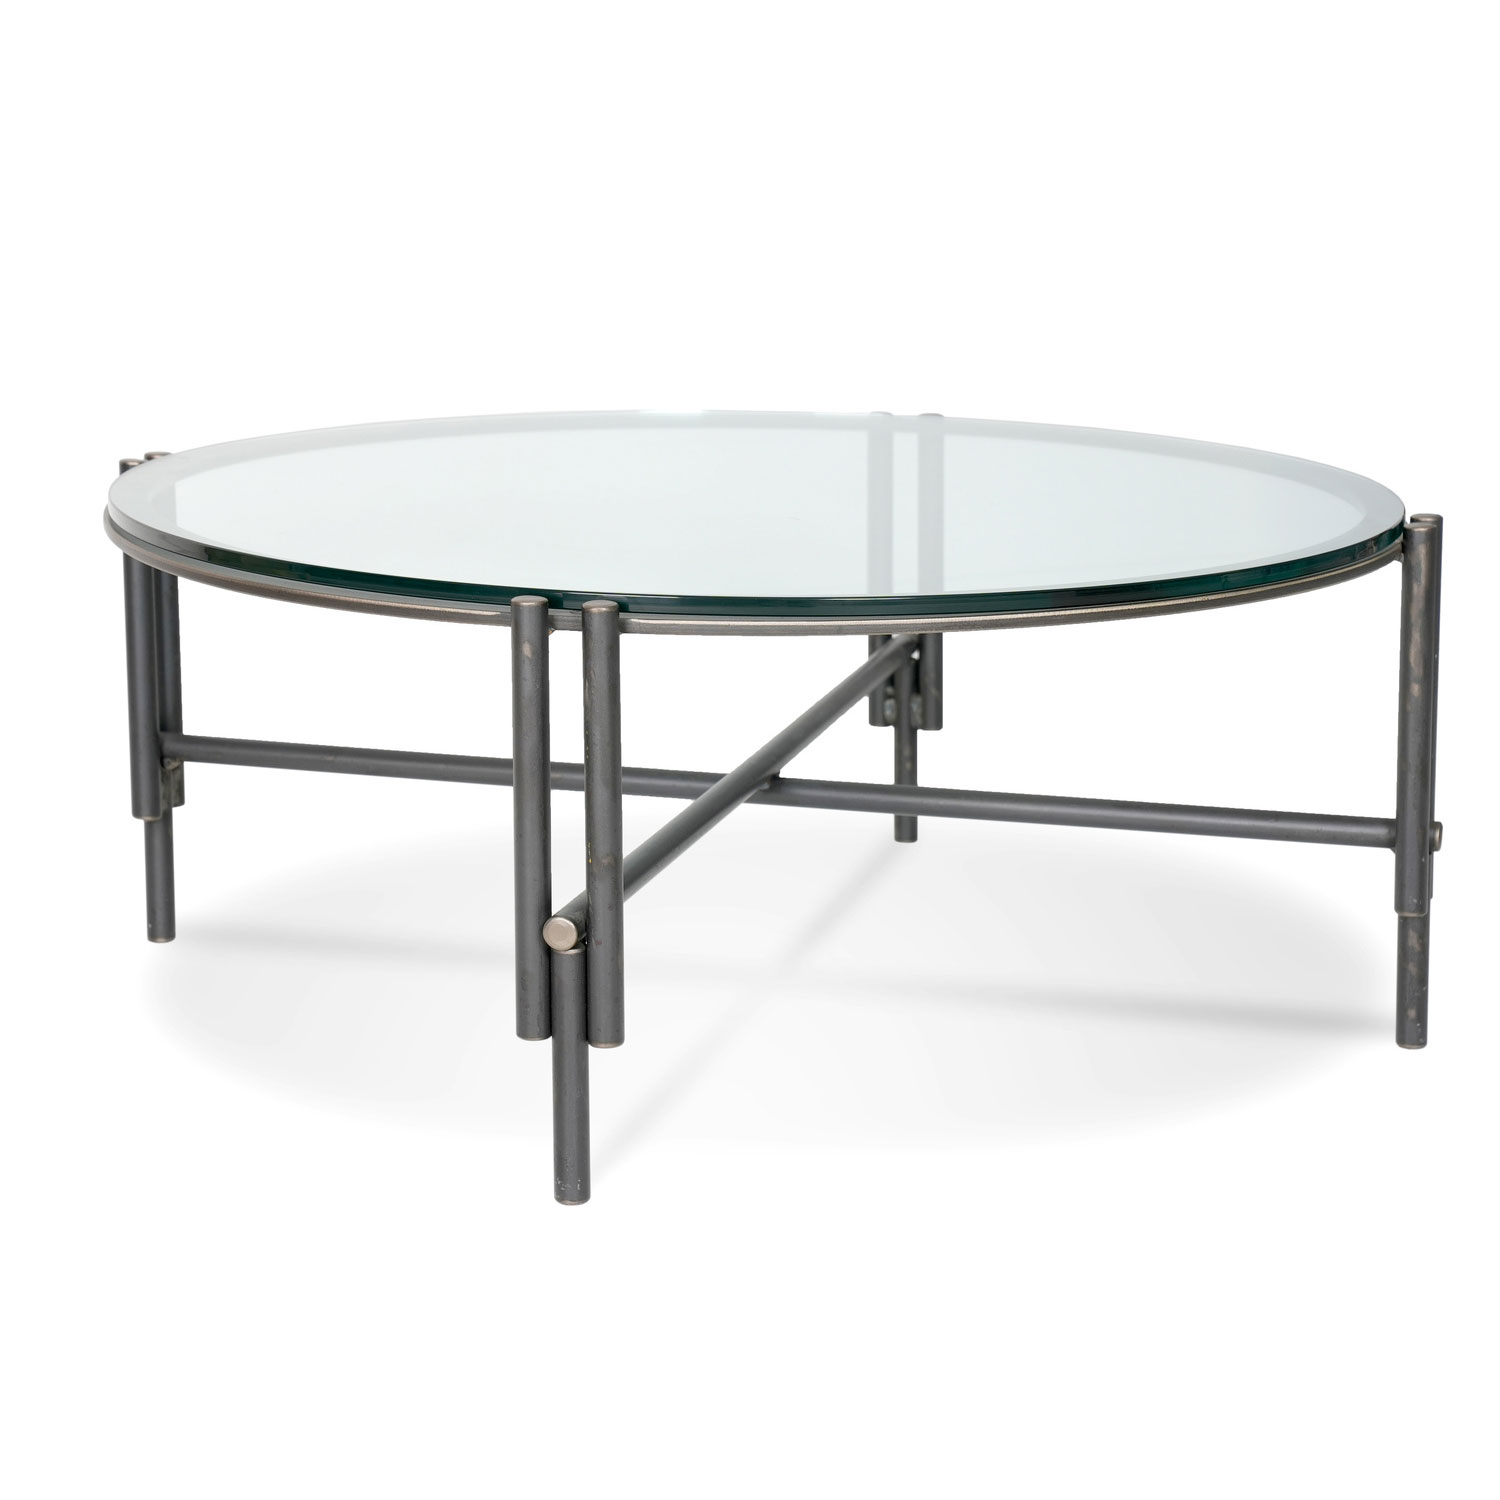 Charleston Forge Gibson 42 inch Round Cocktail Table